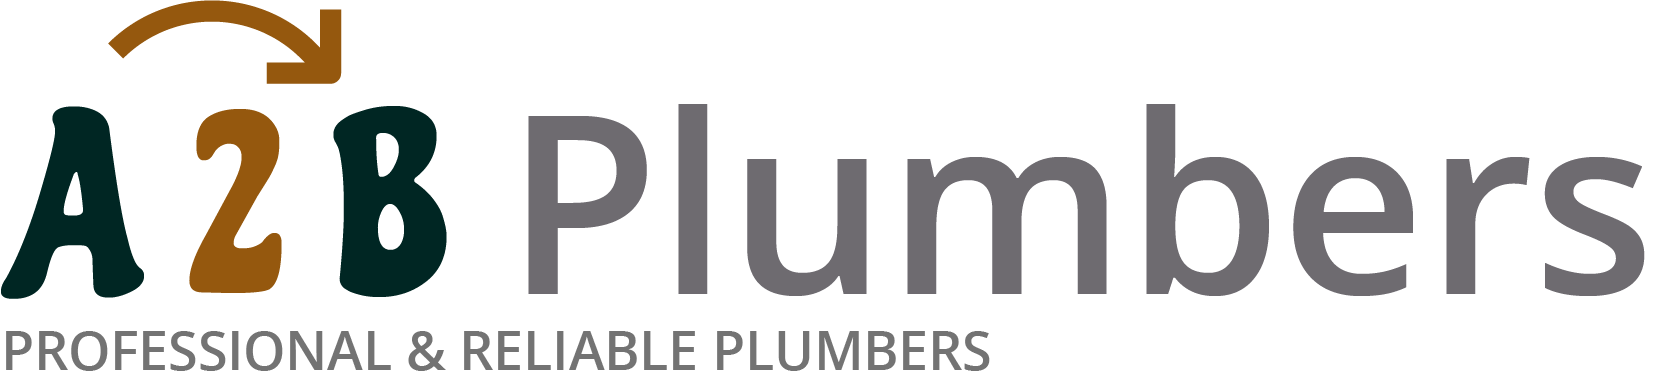 If you need a boiler installed, a radiator repaired or a leaking tap fixed, call us now - we provide services for properties in Corfe Mullen and the local area.